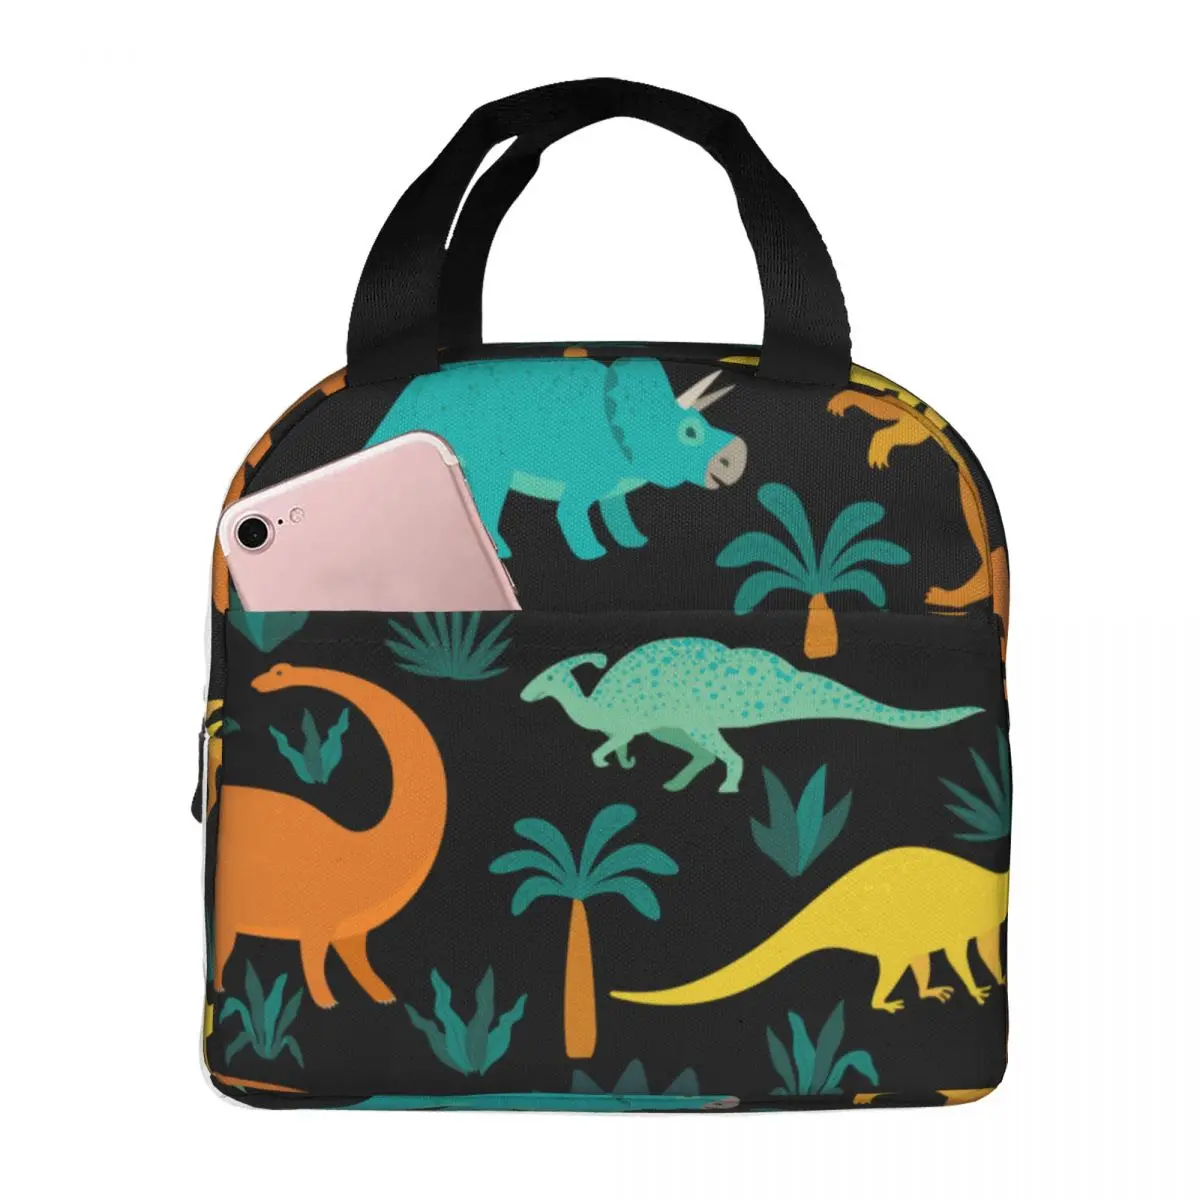 Cute Colorful Dinosaur Pattern Lunch Bags Portable Insulated Oxford Cooler Thermal Food Picnic Lunch Box for Women Kids